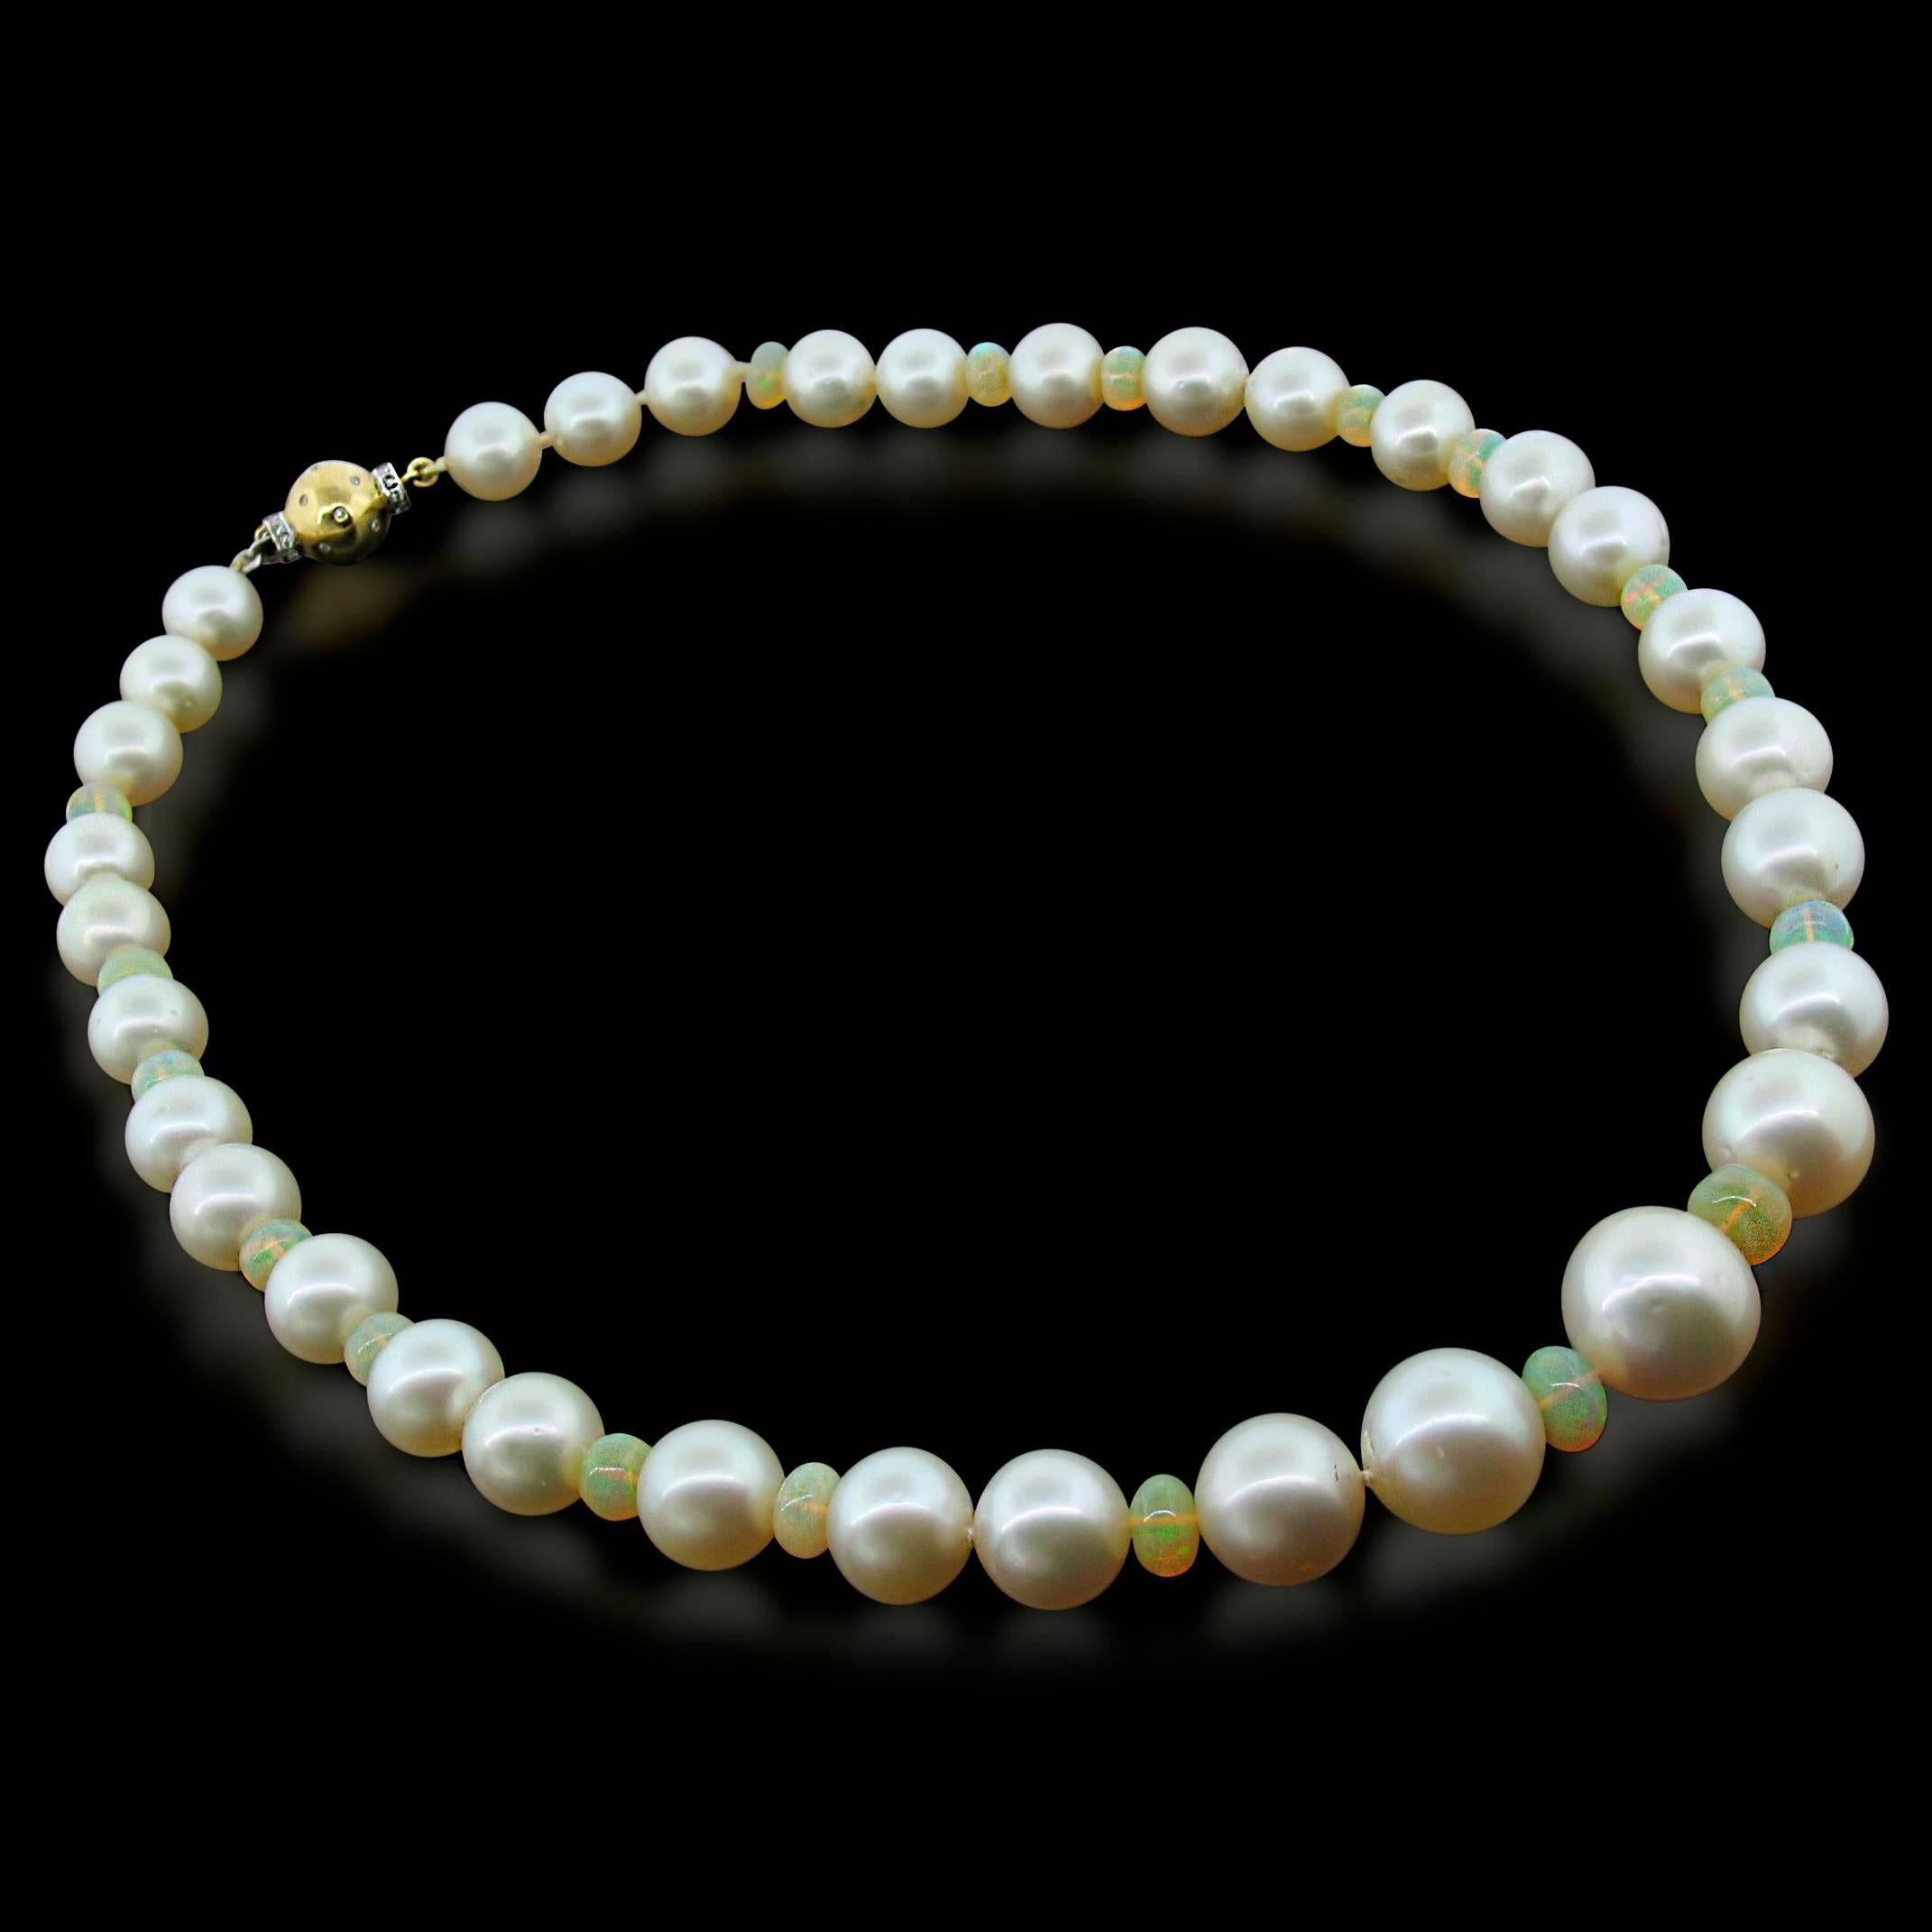 Creamy, round South Sea Pearls are strung on silk and alternated with warm Fire Opal rondells weighing a total of 19.56 carats.  It fastens with a beautiful 18k yellow gold clasp with Diamond accents.  18